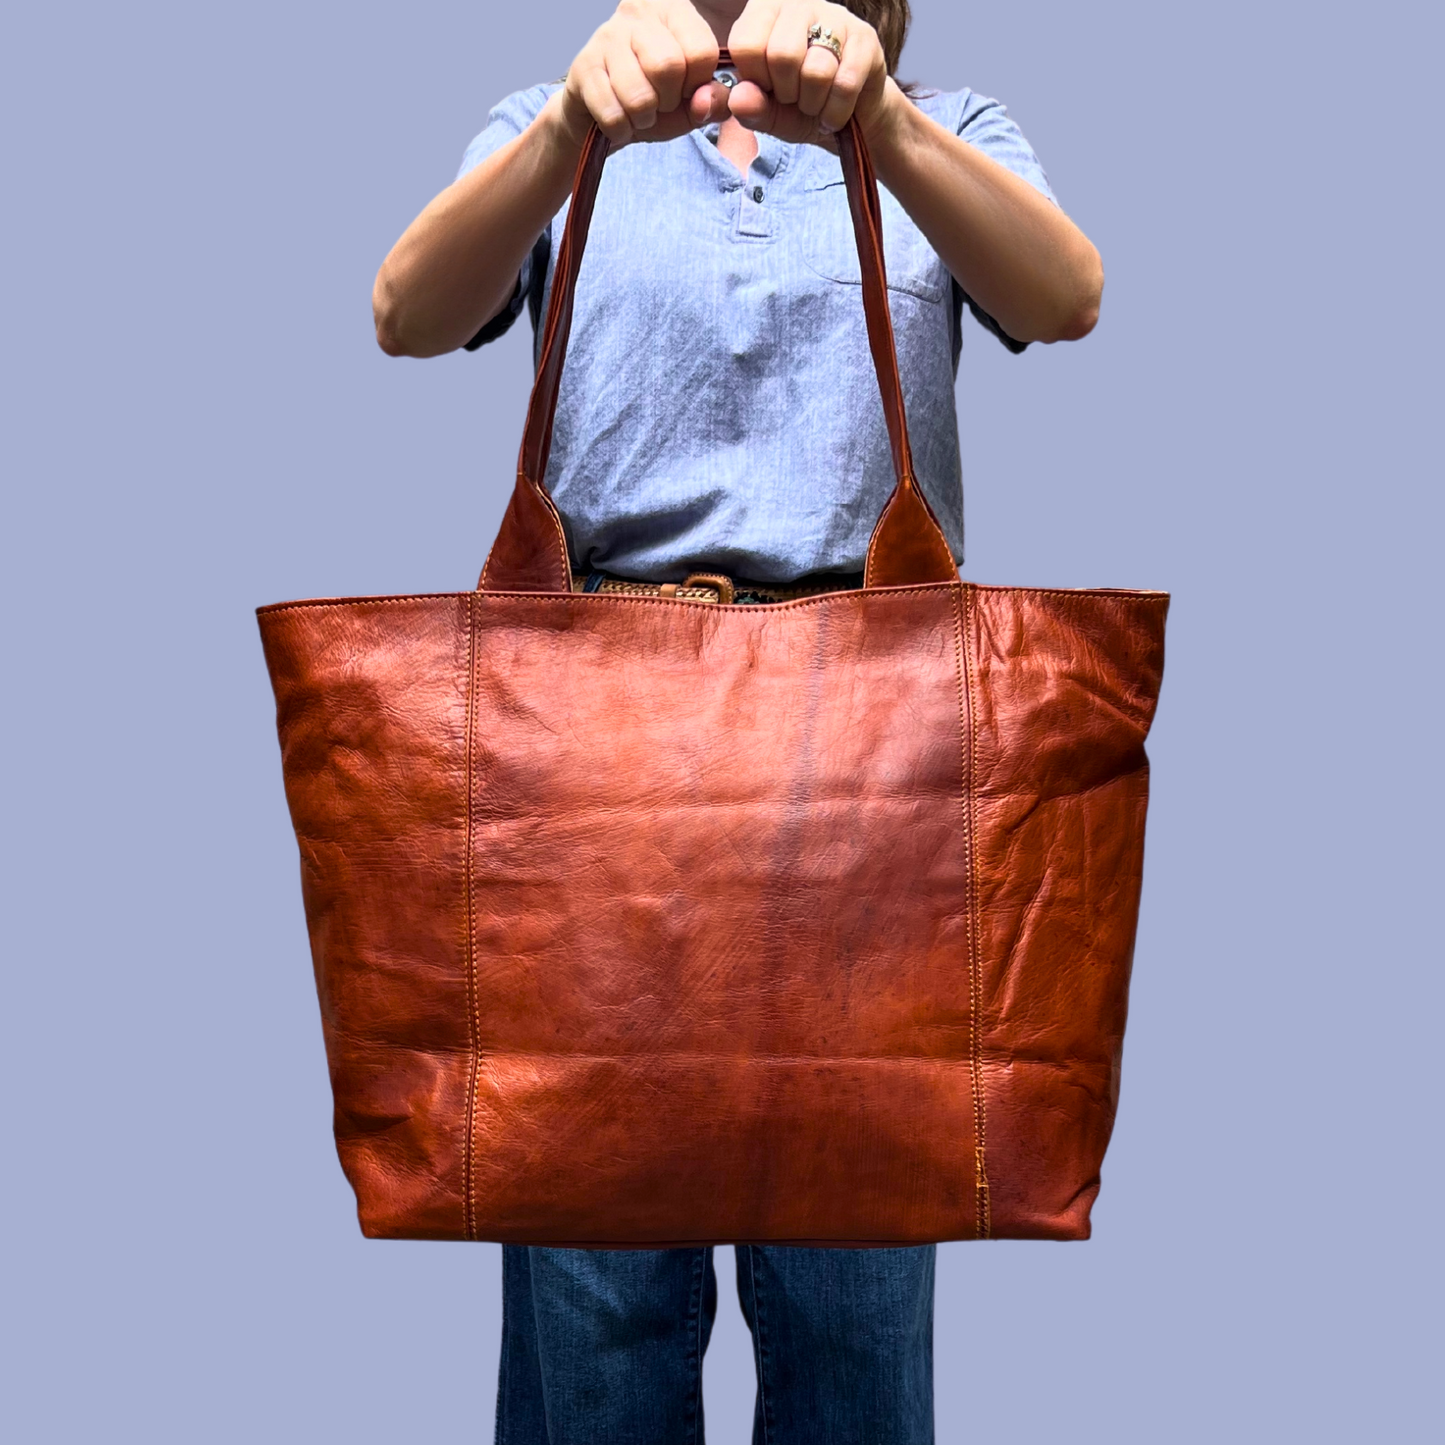 Woven Leather Tote (Cognac)